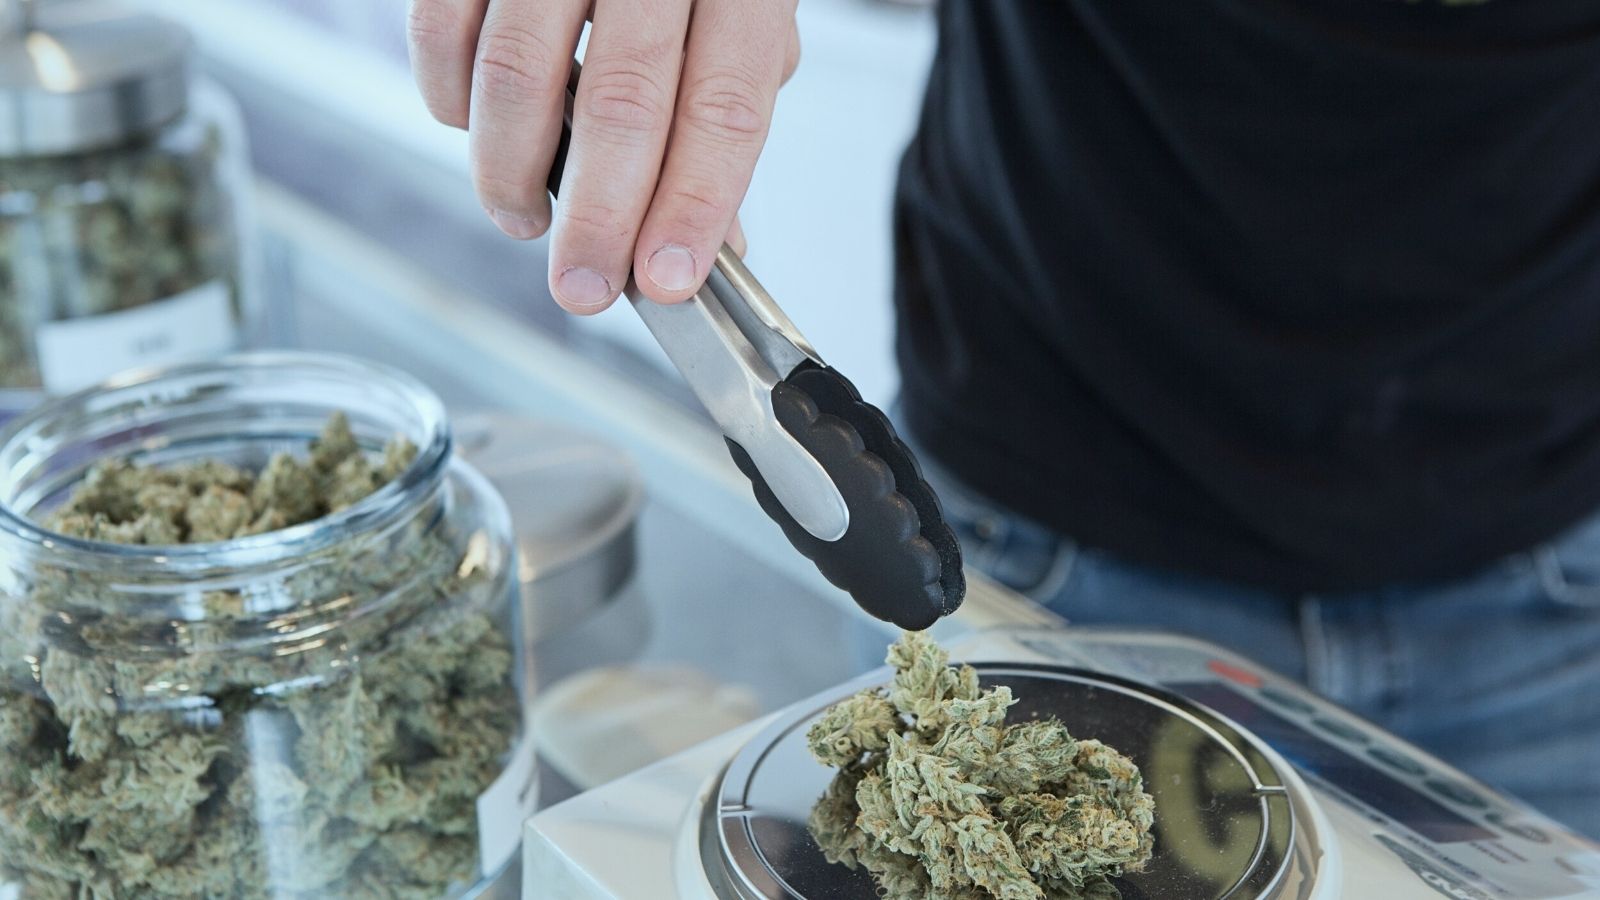 A man weighing cannabis on scales in a dispensary